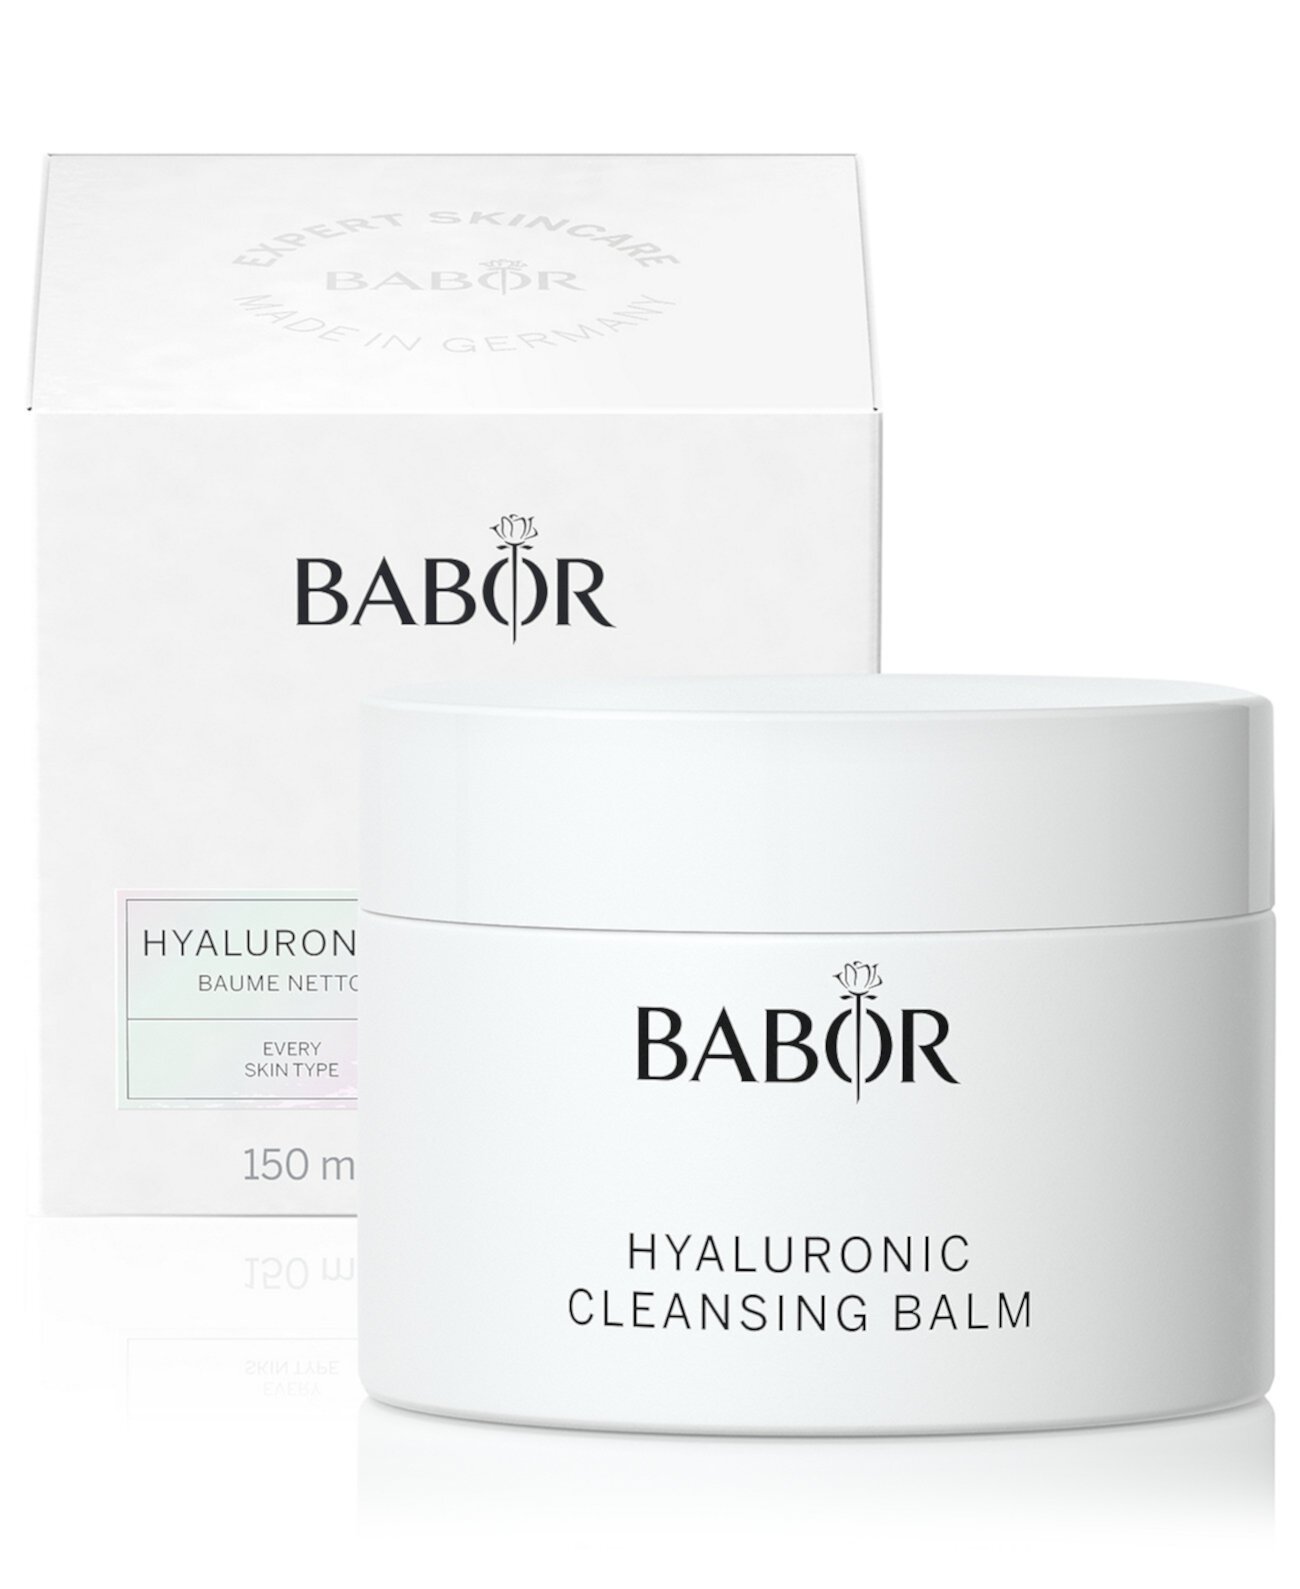 Hyaluronic Cleansing Balm, 5.3 oz. BABOR